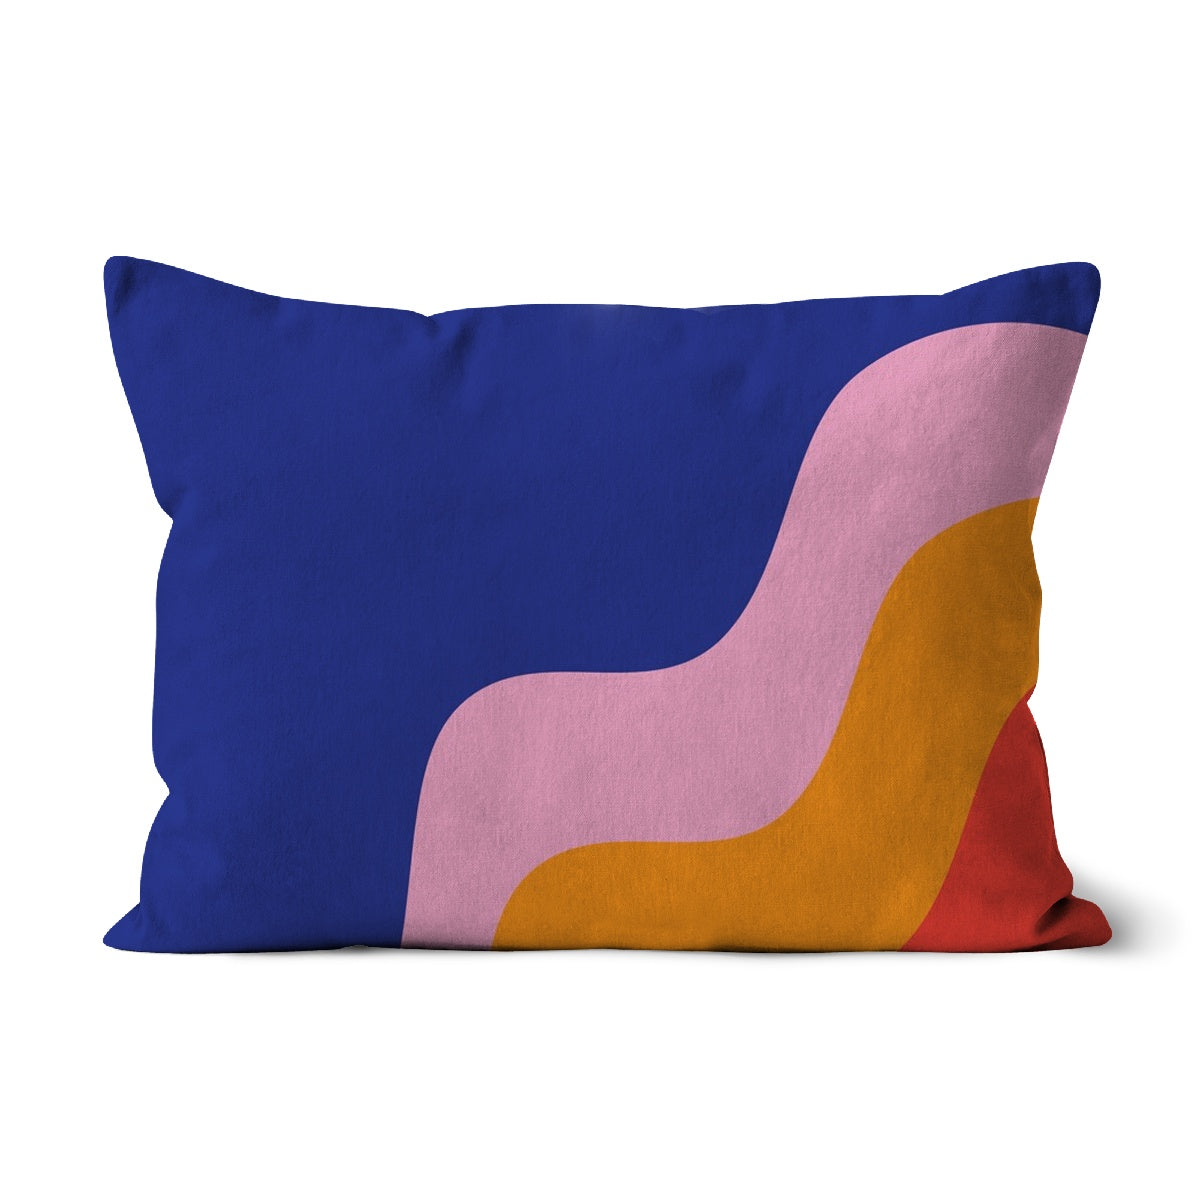 COLORWAVES 1 Throw Pillow